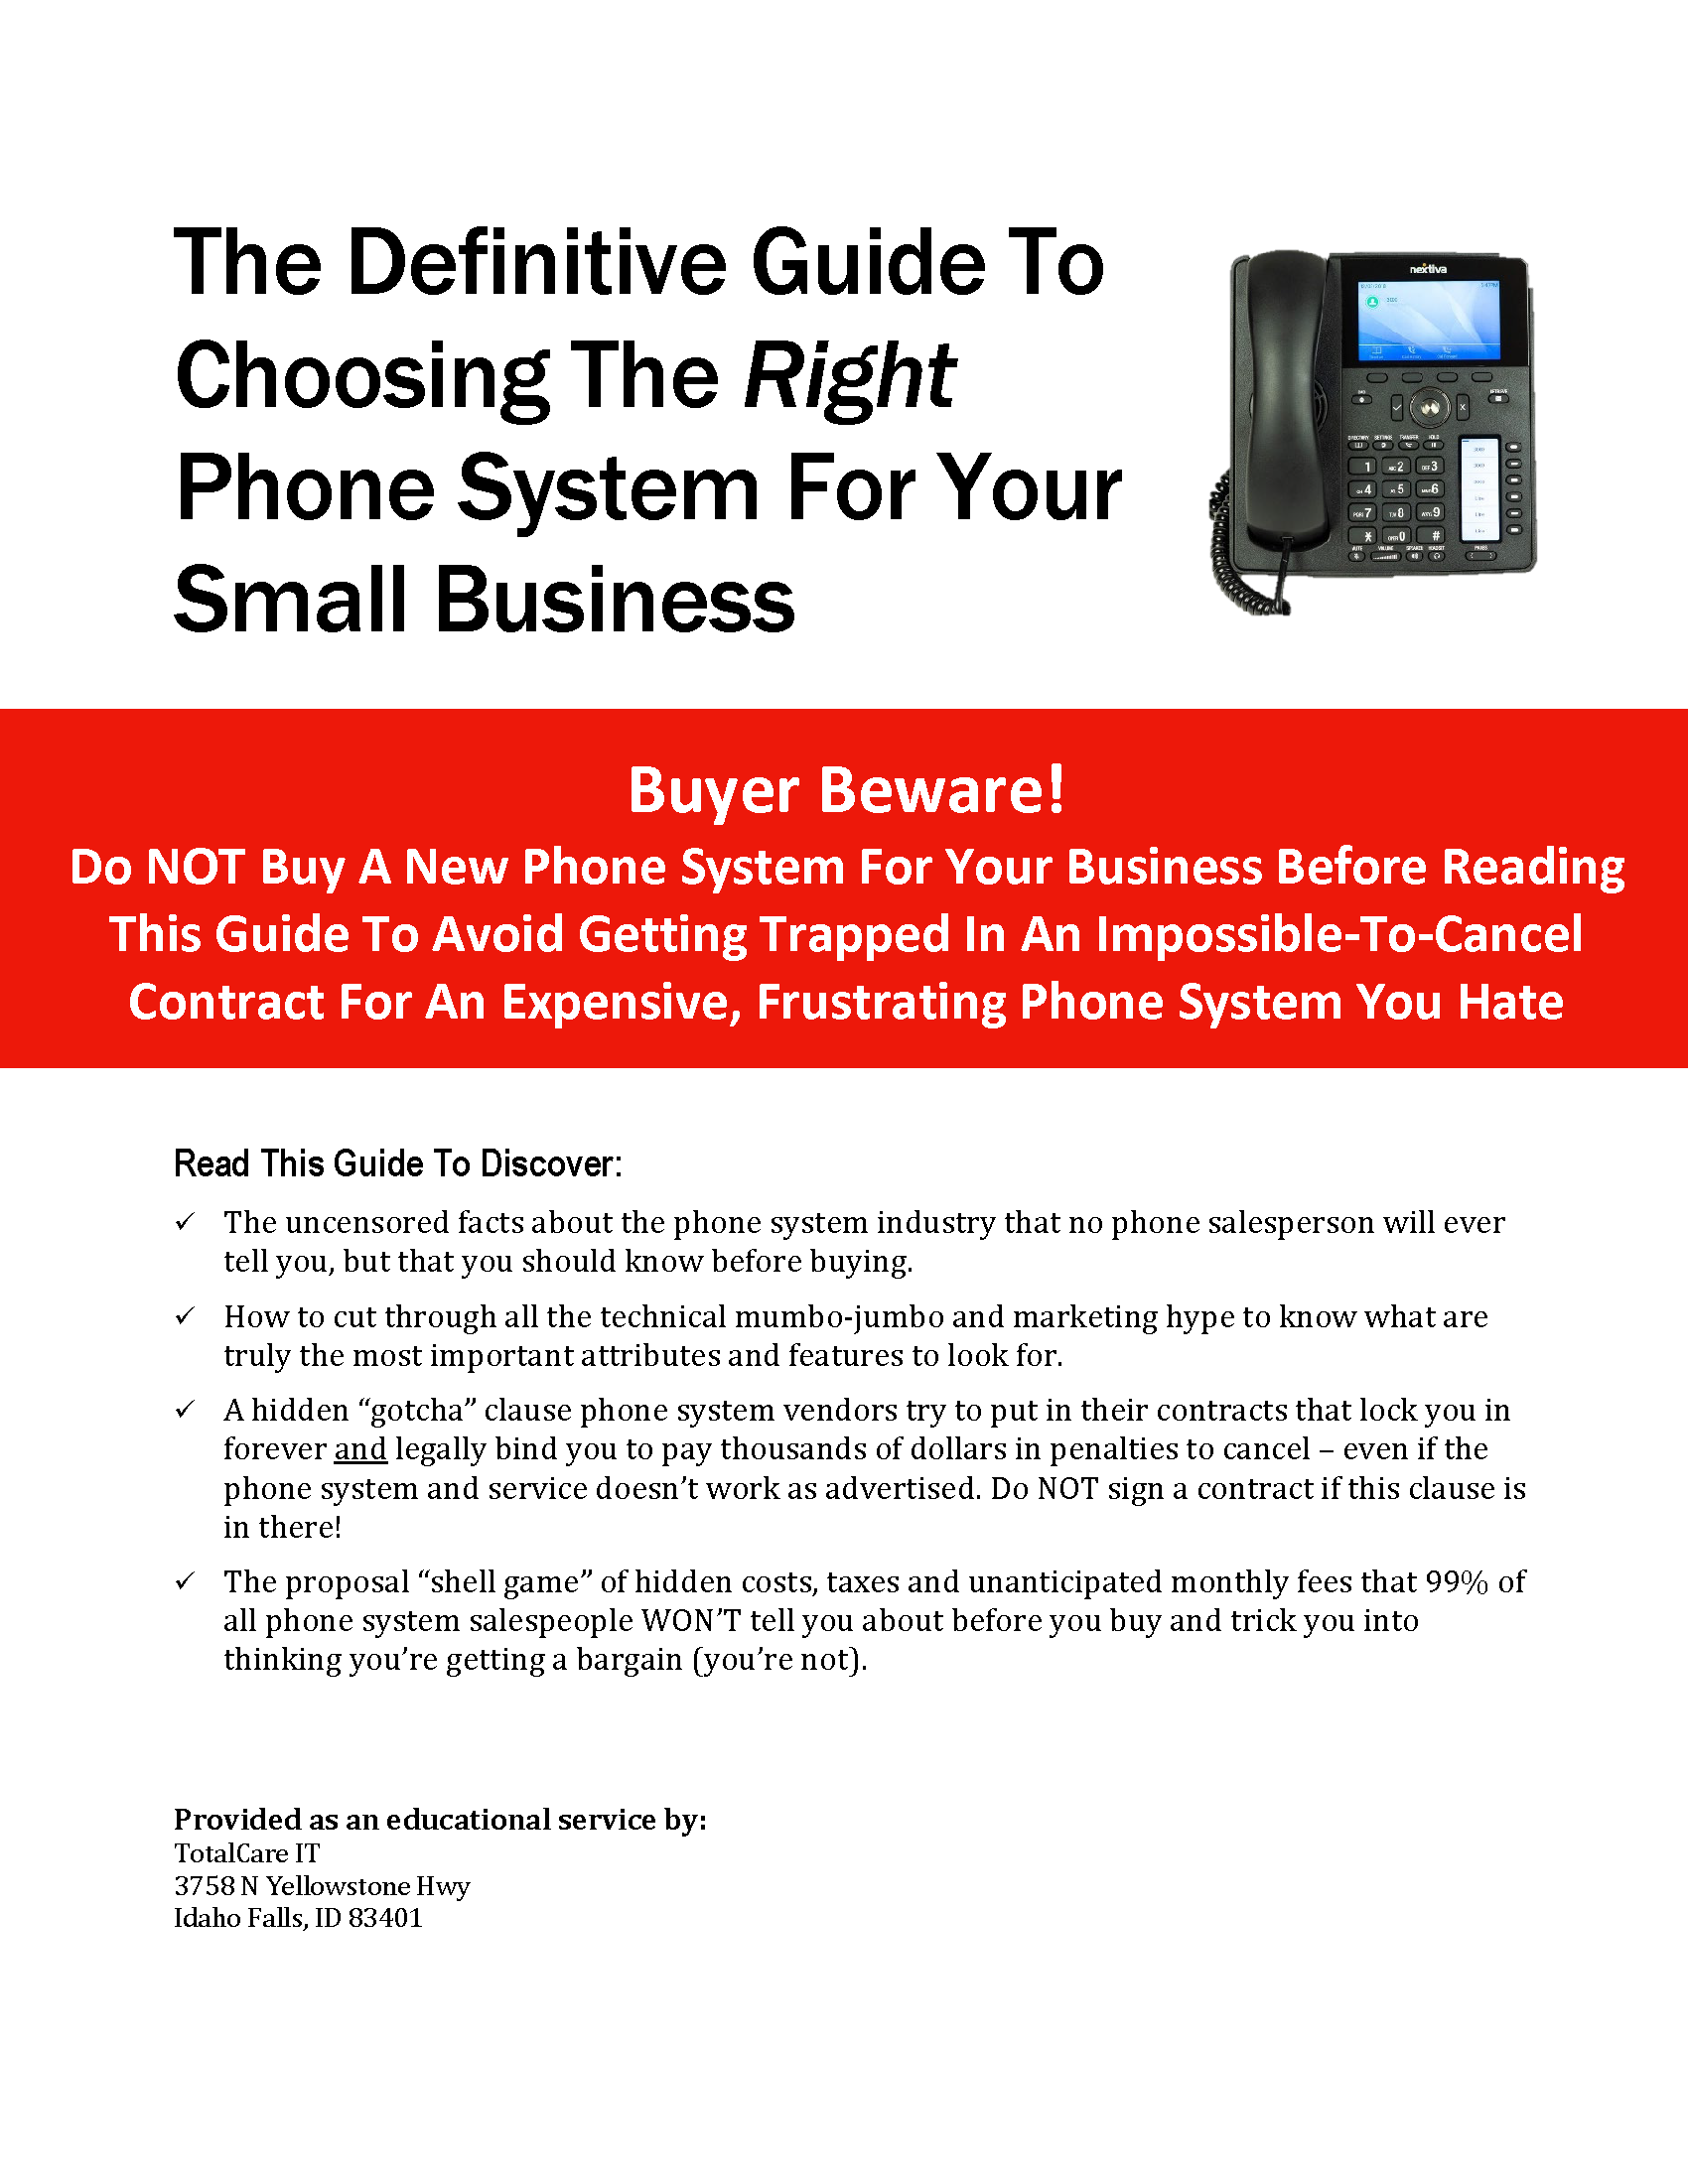 Phone System Buyers Guide